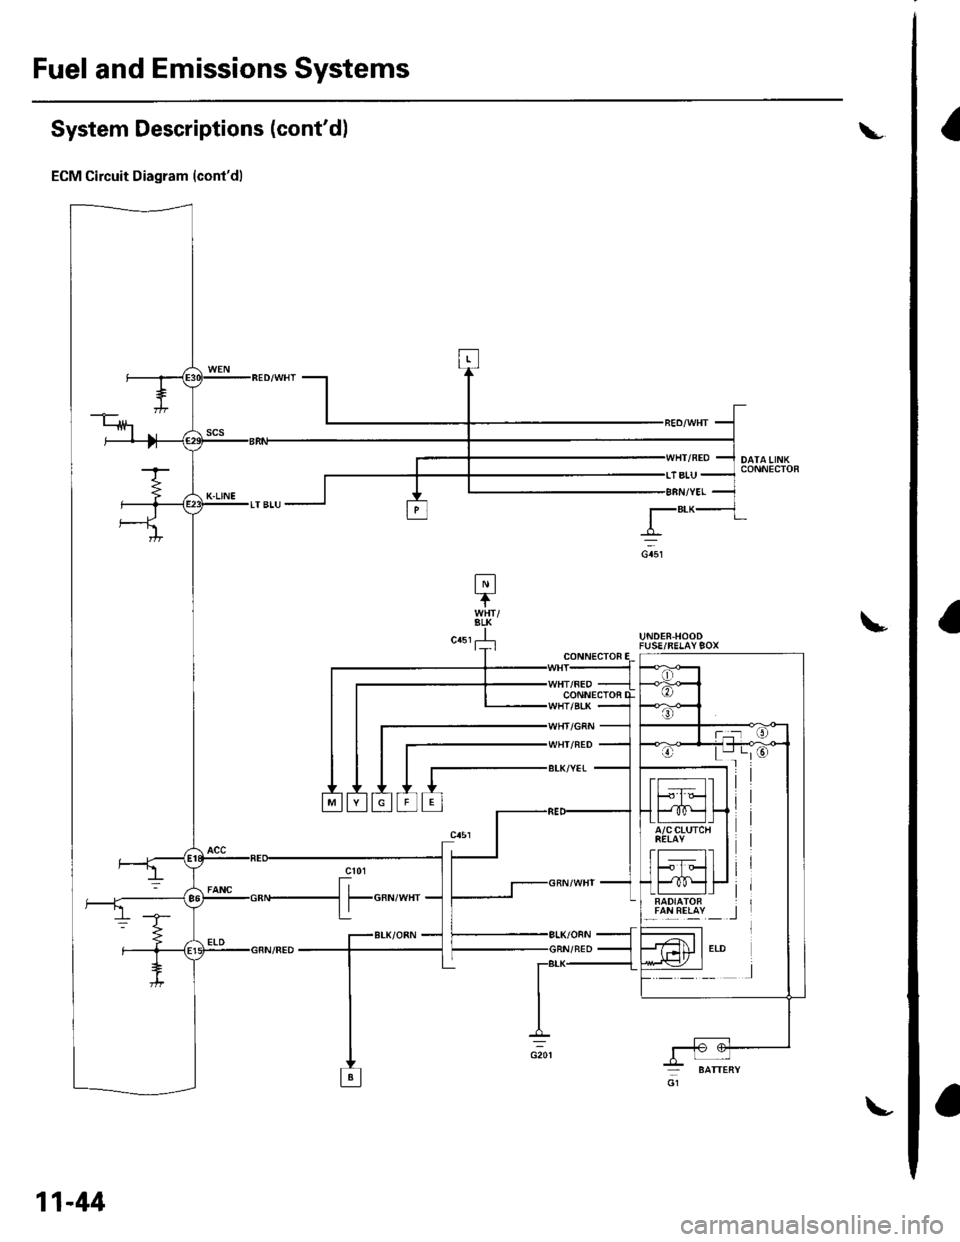 HONDA CIVIC 2002 7.G Workshop Manual Fuel and Emissions Systems
a
System Descriptions (contdl
ECM Circuit Diagram (contd)
L
!UNDER.HOODFUSE/RELAY9OX
lalLREllY _ _l
CONN€CTOF
CONNECTOi
WHI/NED
BLK/YET
11-44 